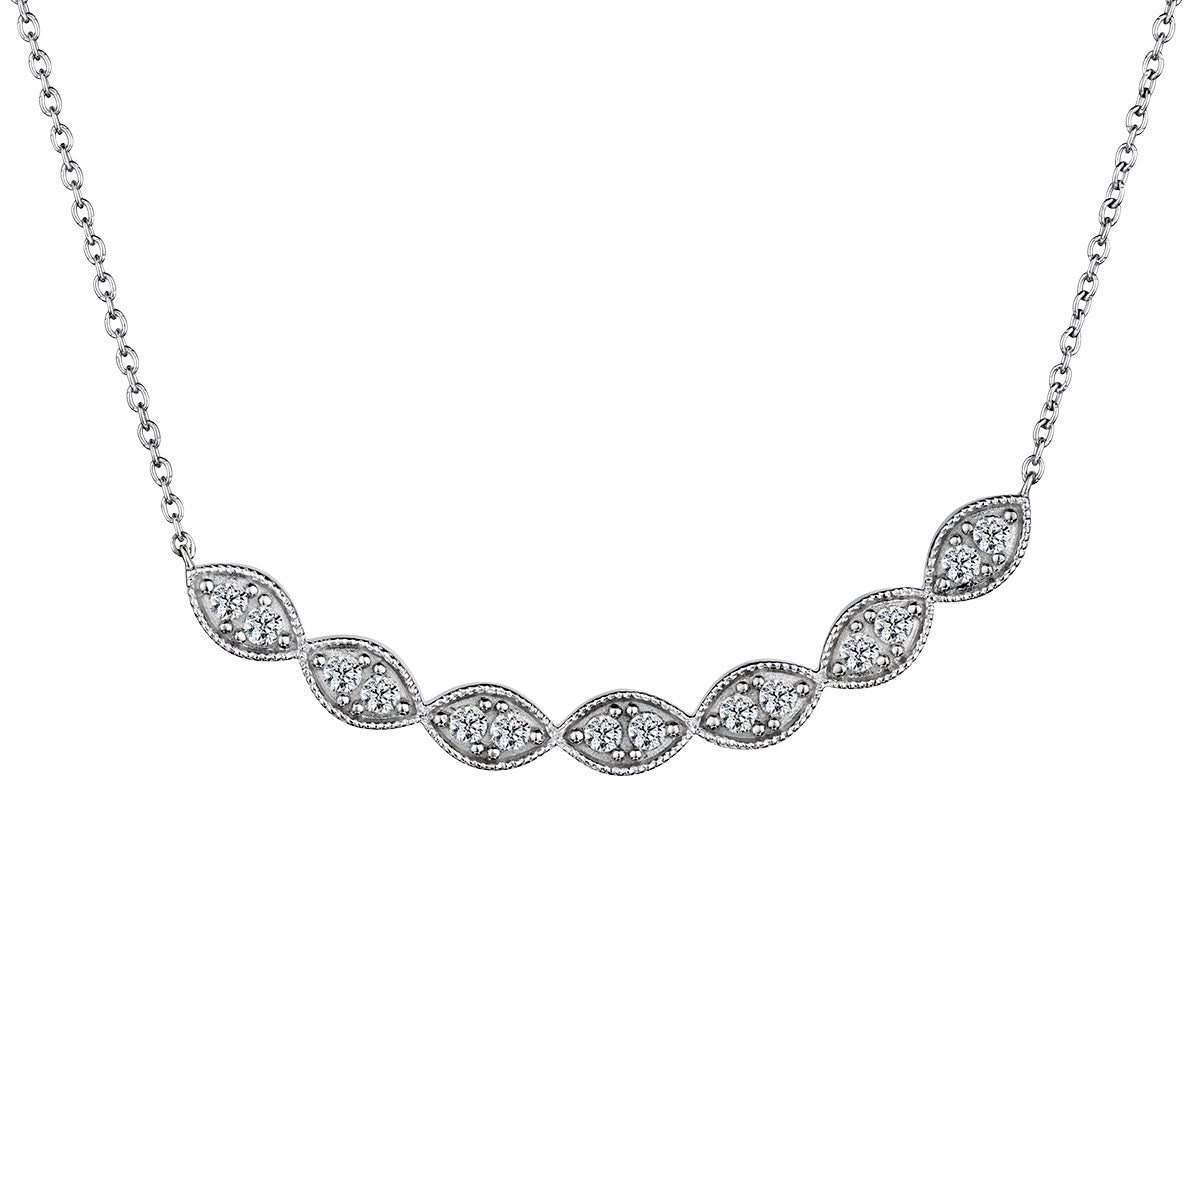 .50 Carat of Diamonds Necklace  Sterling Silver. Necklaces and Pendants. Griffin Jewellery Designs. 